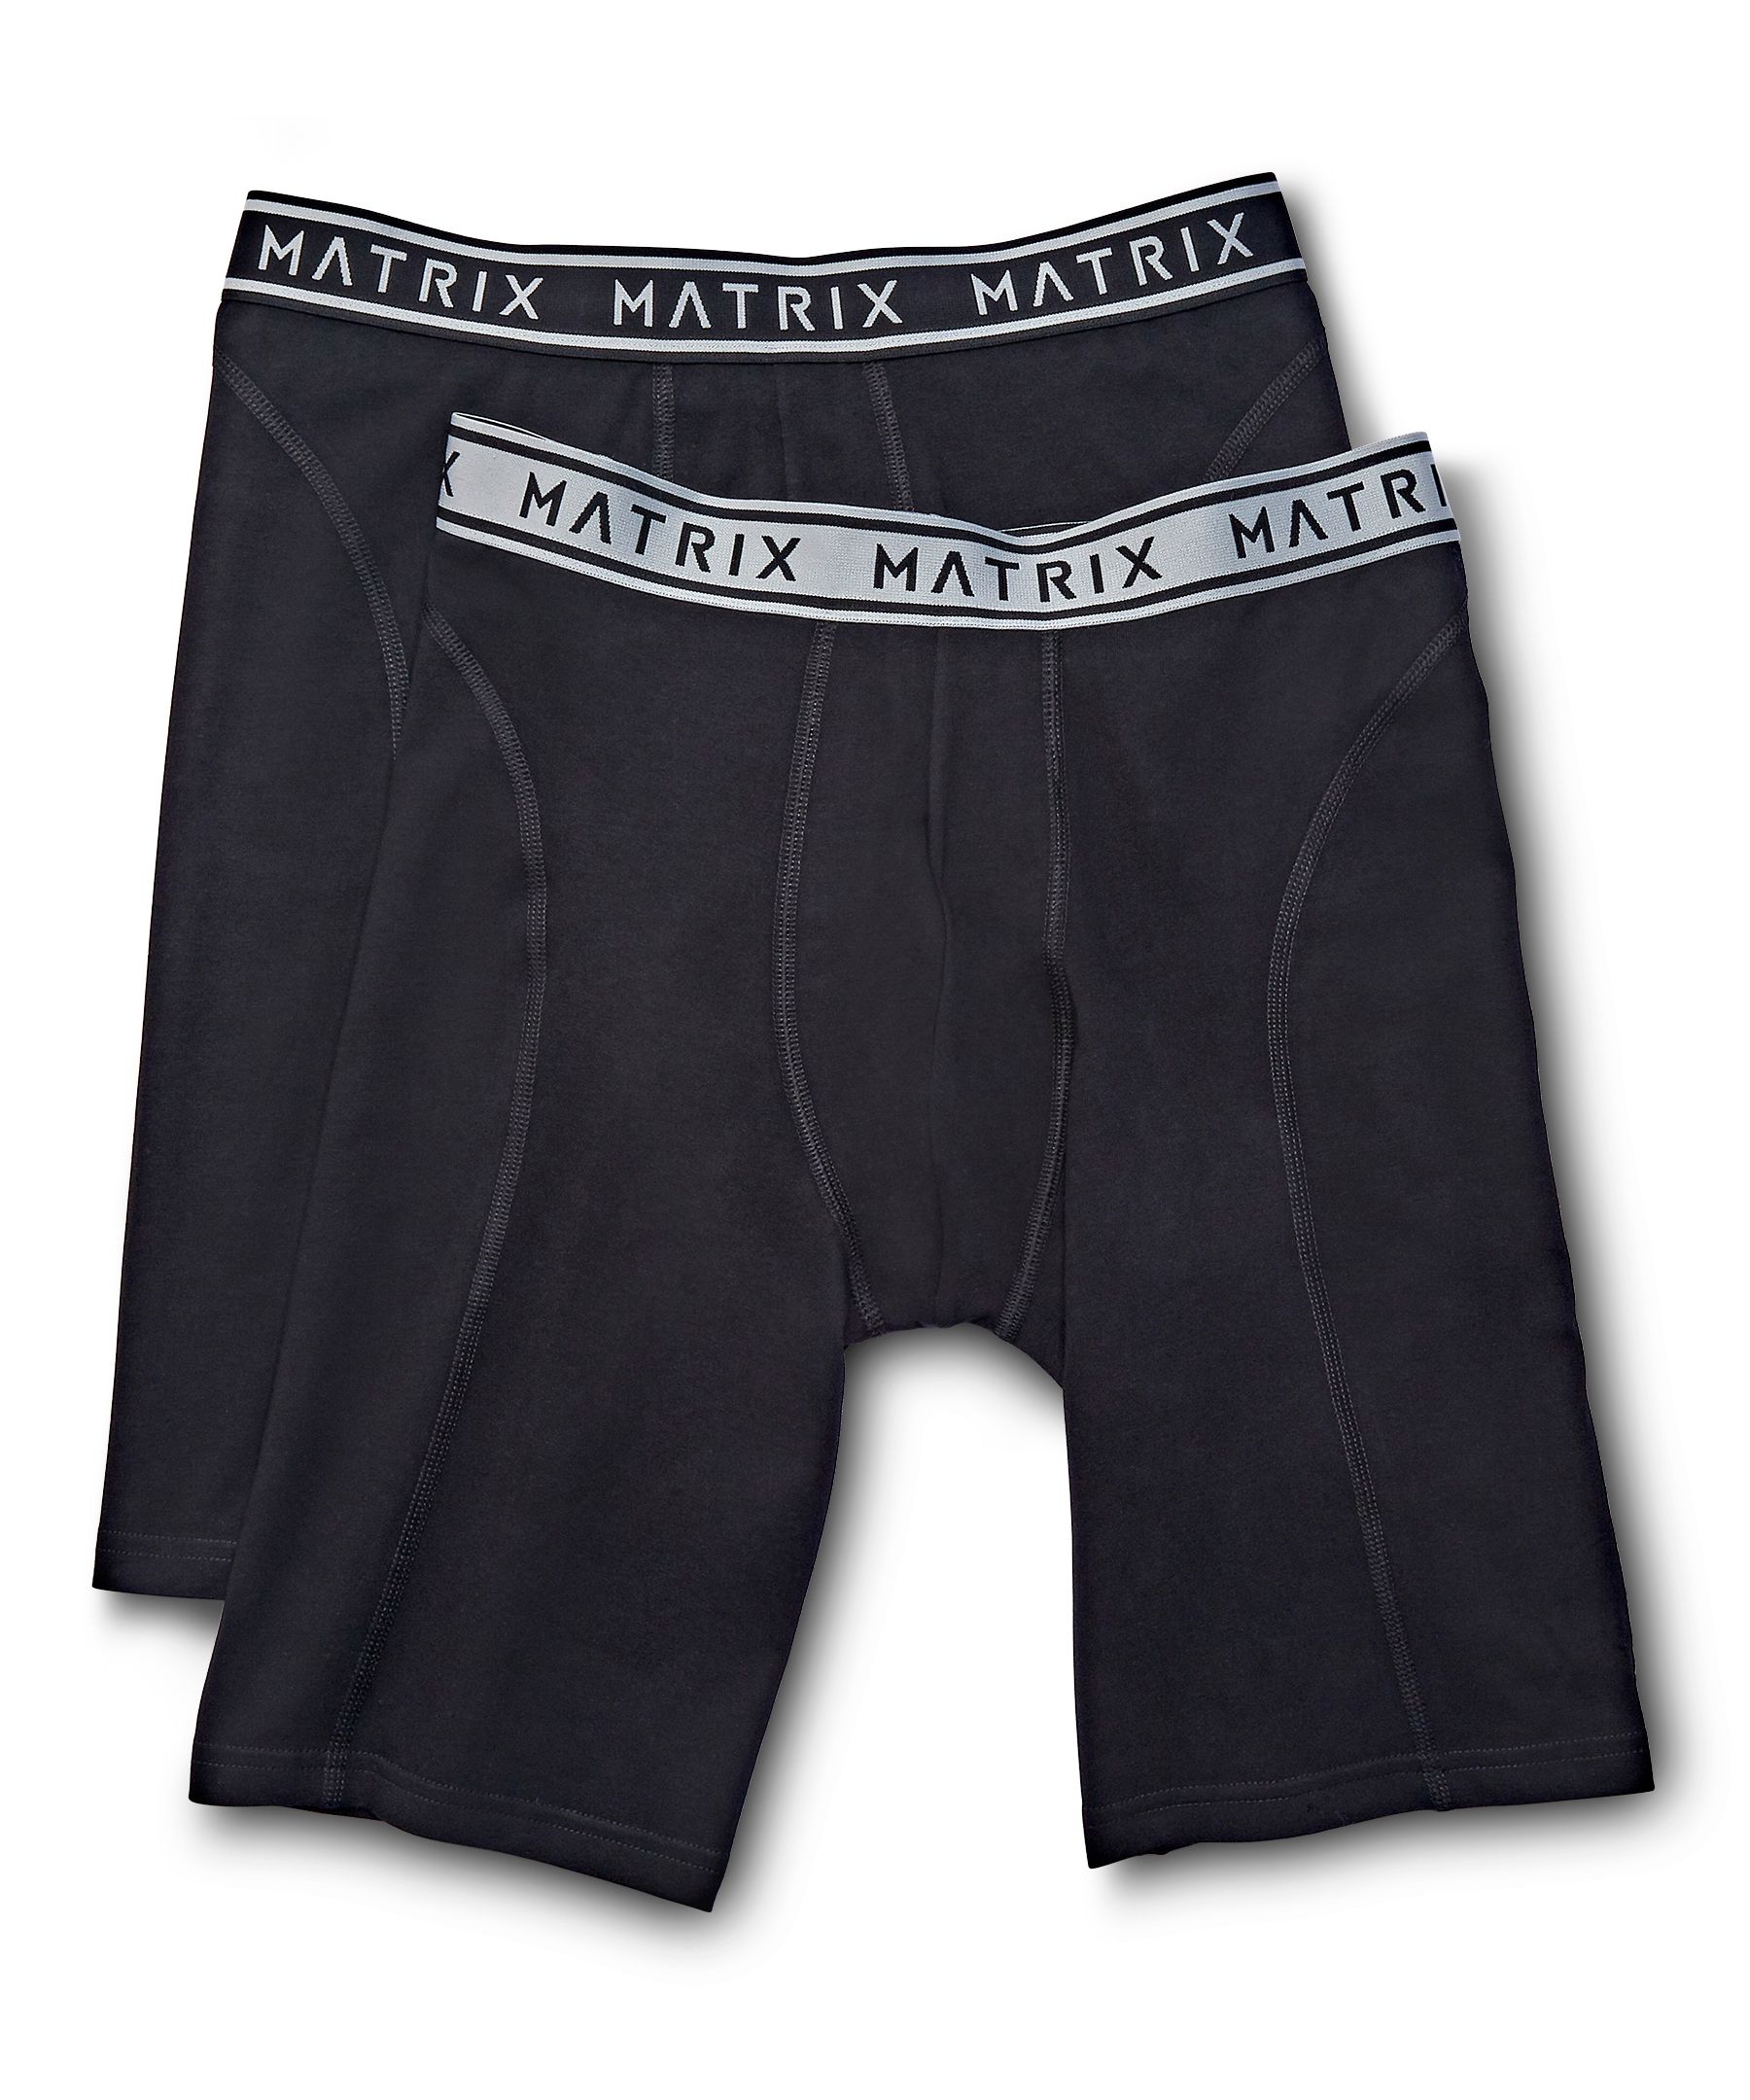 Solid 9 Performance Knit Boxer Briefs